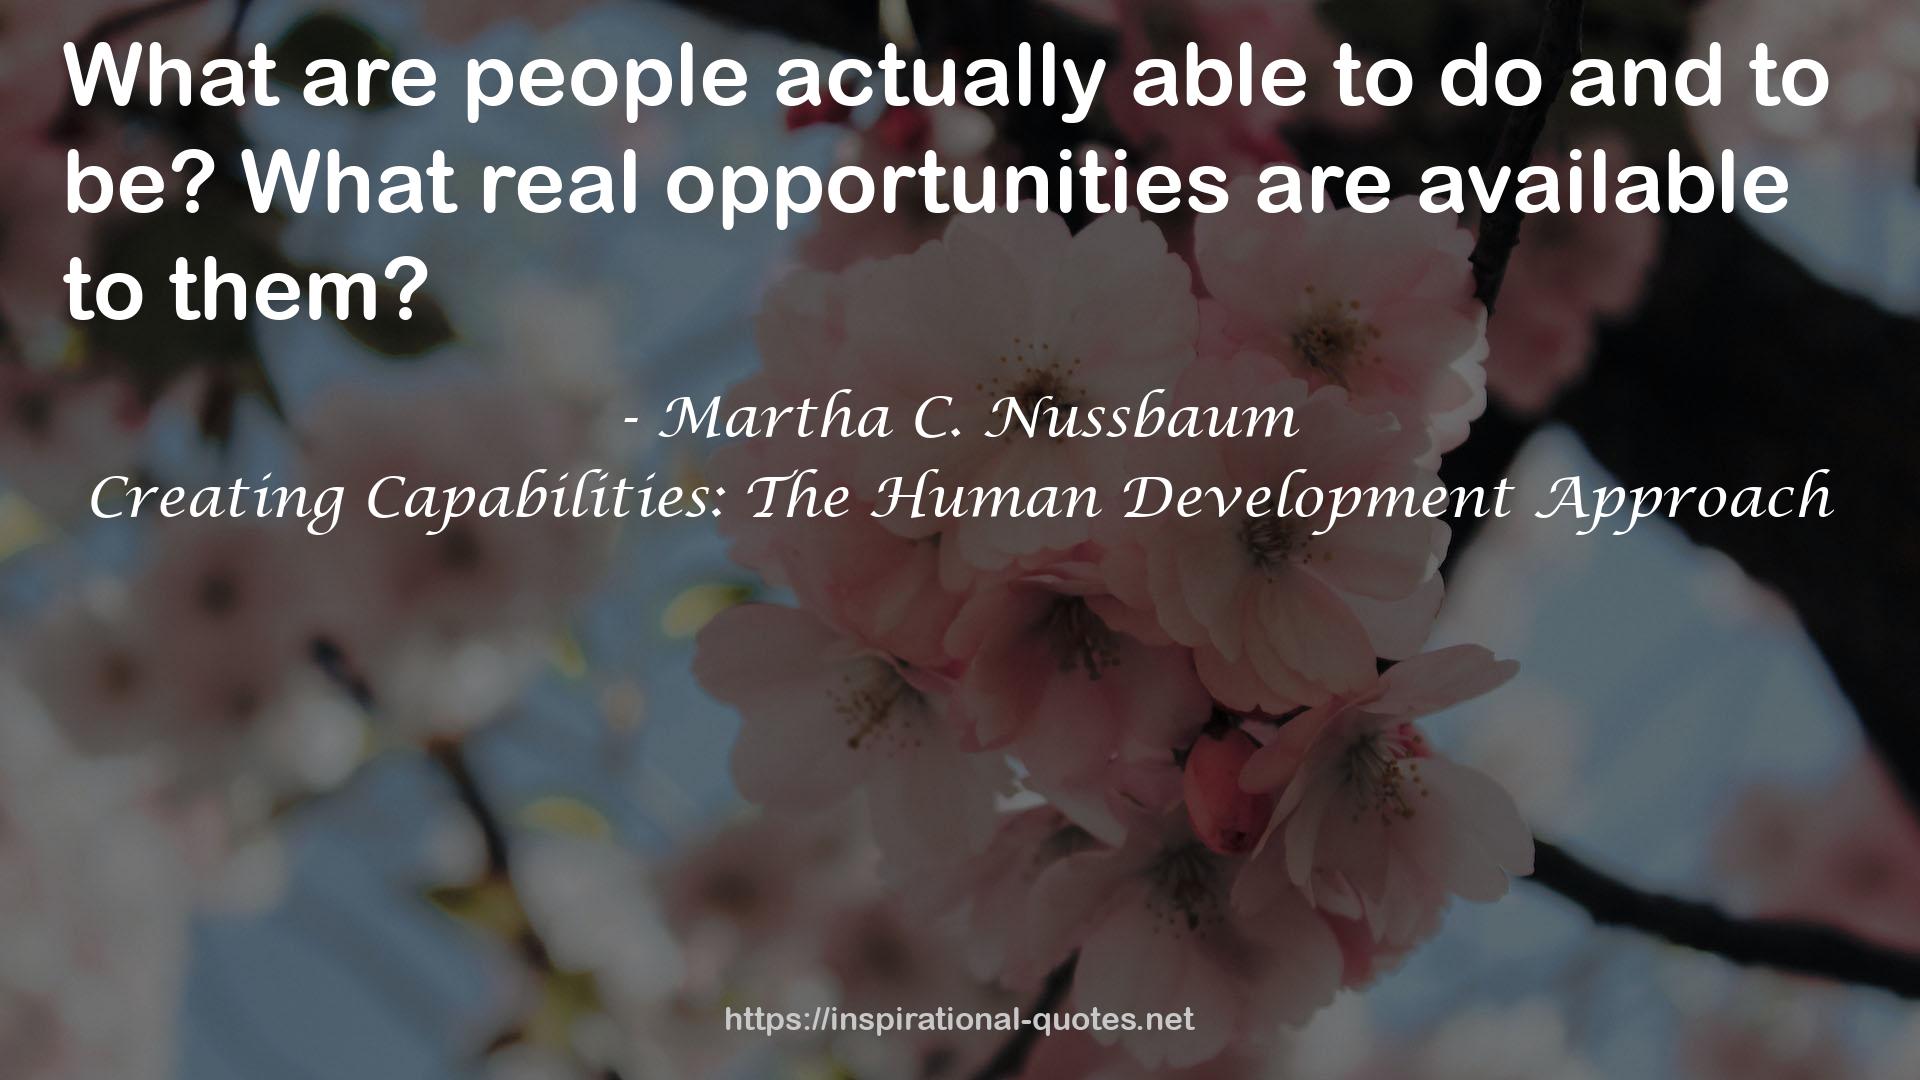 Creating Capabilities: The Human Development Approach QUOTES